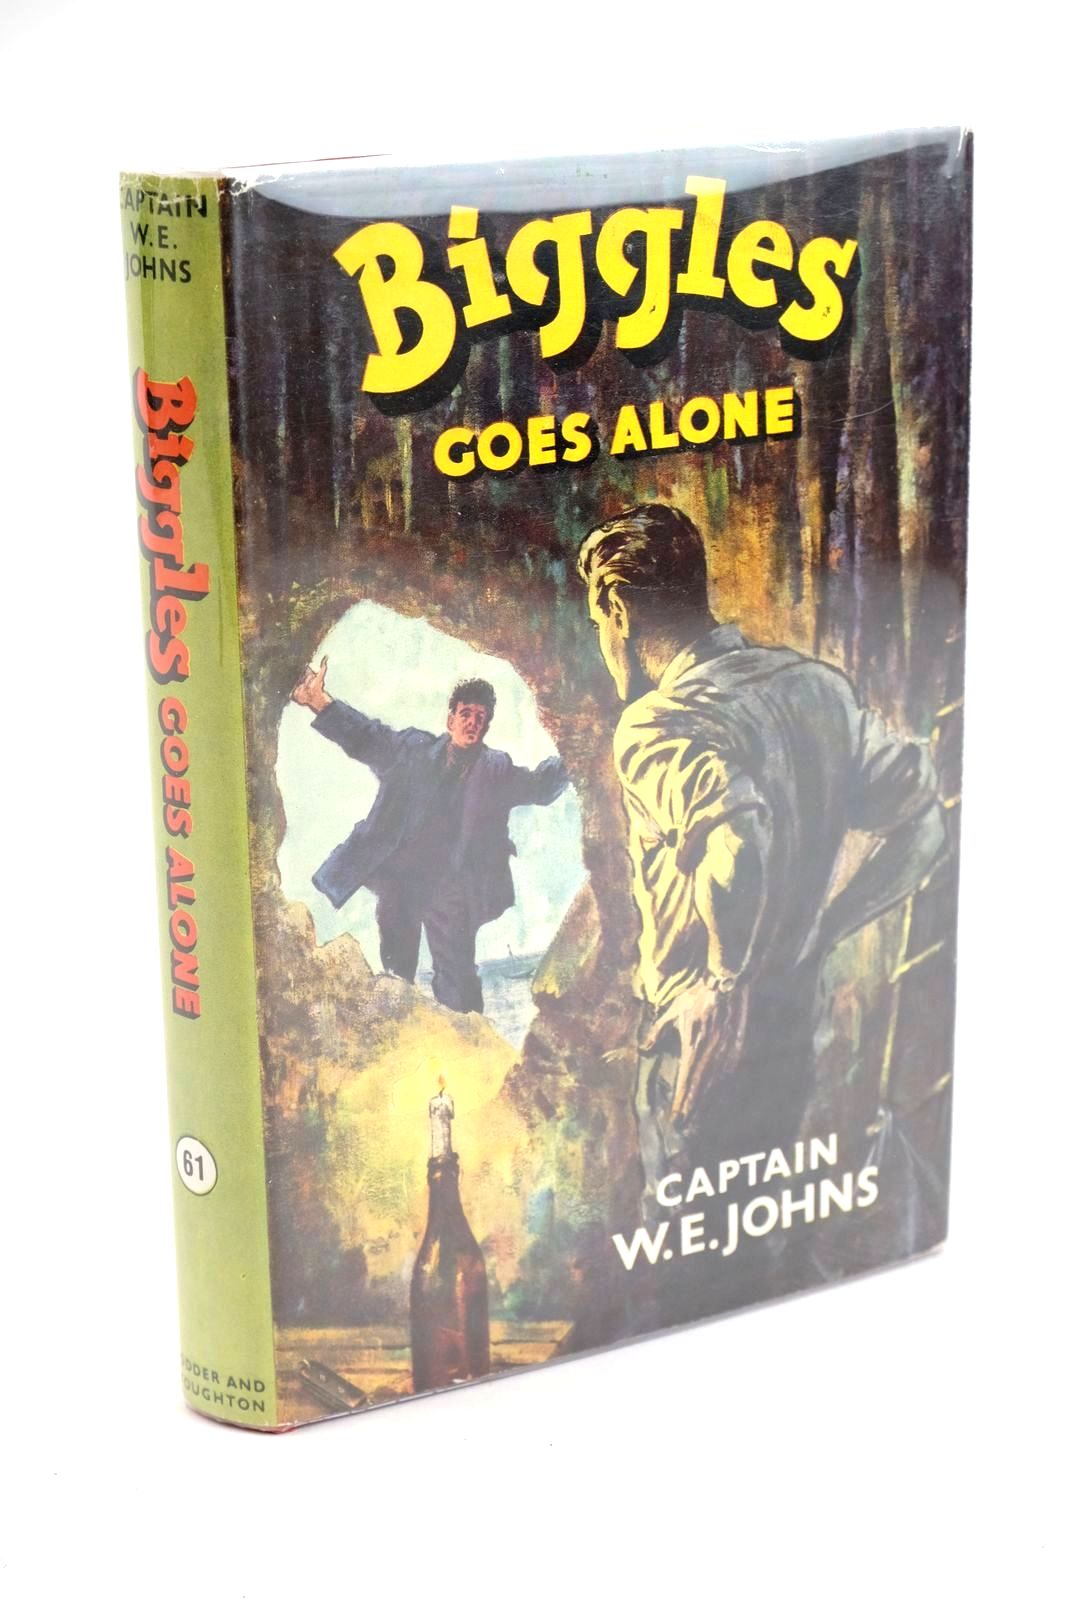 Photo of BIGGLES GOES ALONE written by Johns, W.E. illustrated by Stead,  published by Hodder &amp; Stoughton (STOCK CODE: 1323433)  for sale by Stella & Rose's Books